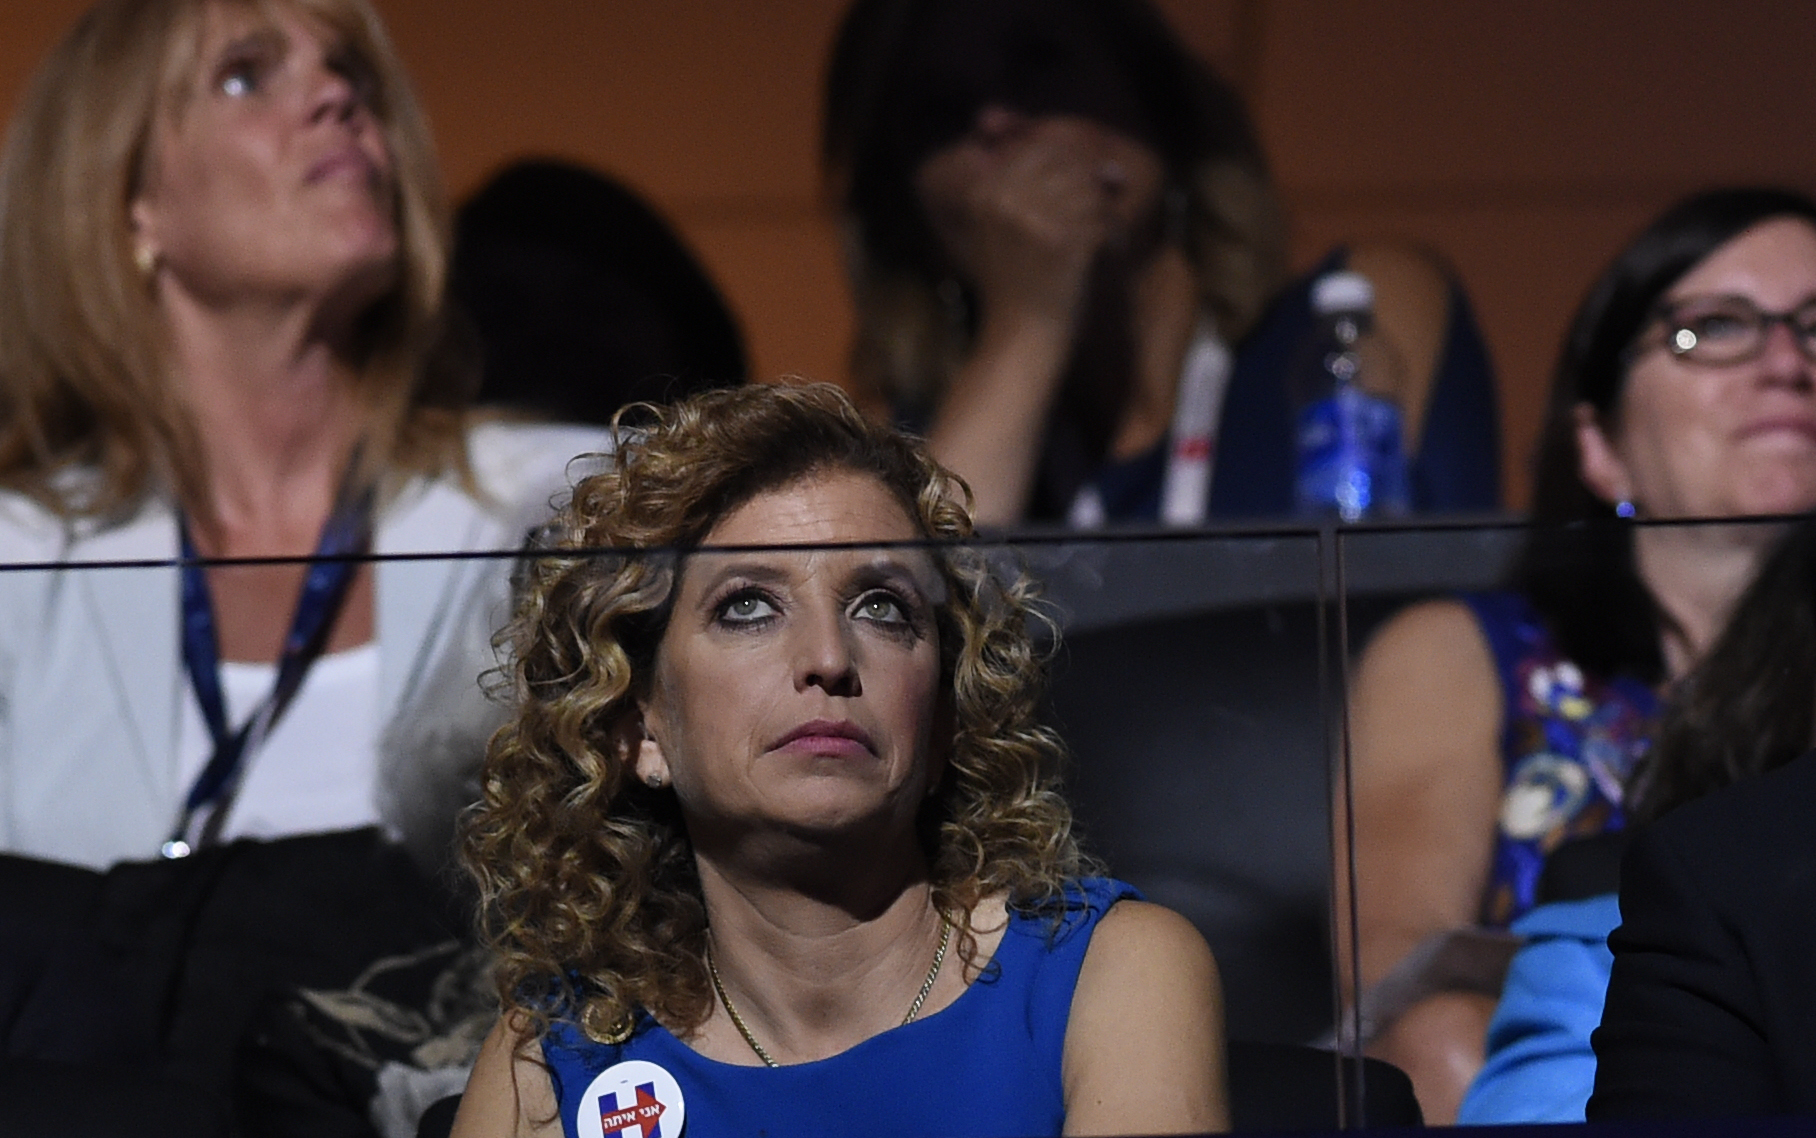 Former chairperson of the Democratic National Committee Debbie Wasserman Schultz listens to the biographical film presentation of Democratic presidential nominee Hillary Clinton during the fourth and final night of the Democratic National Convention at Wells Fargo Center on July 28, 2016 in Philadelphia, Pennsylvania. (SAUL LOEB/AFP/Getty Images)